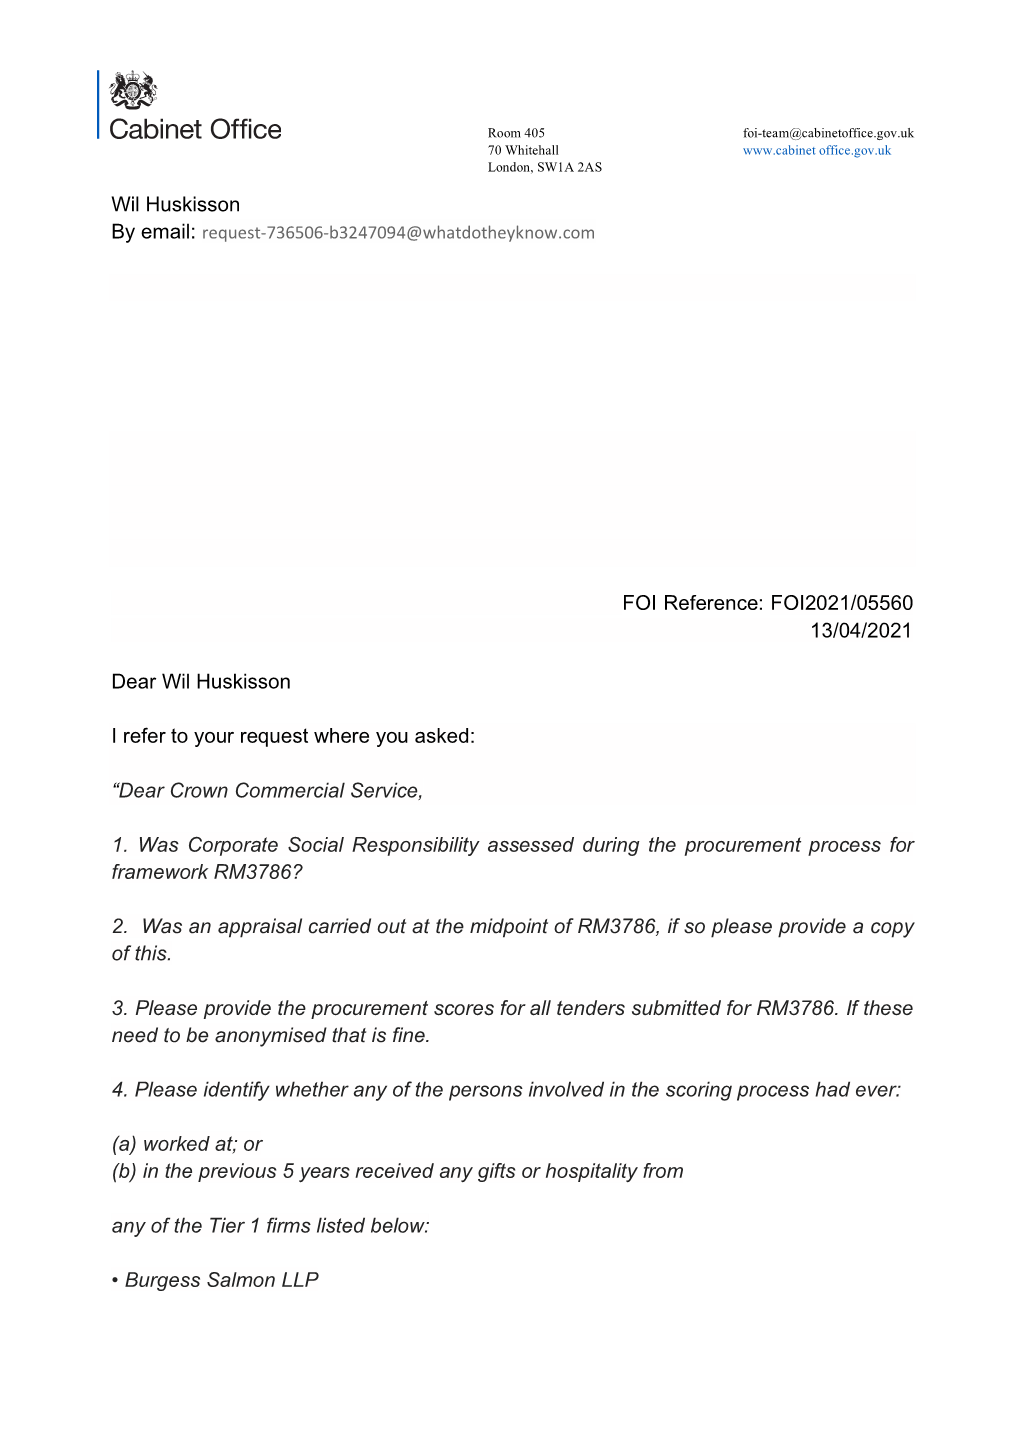 FOI2021/05560 13/04/2021 Dear Wil Huskisson I Refer to Your Request Where You Asked